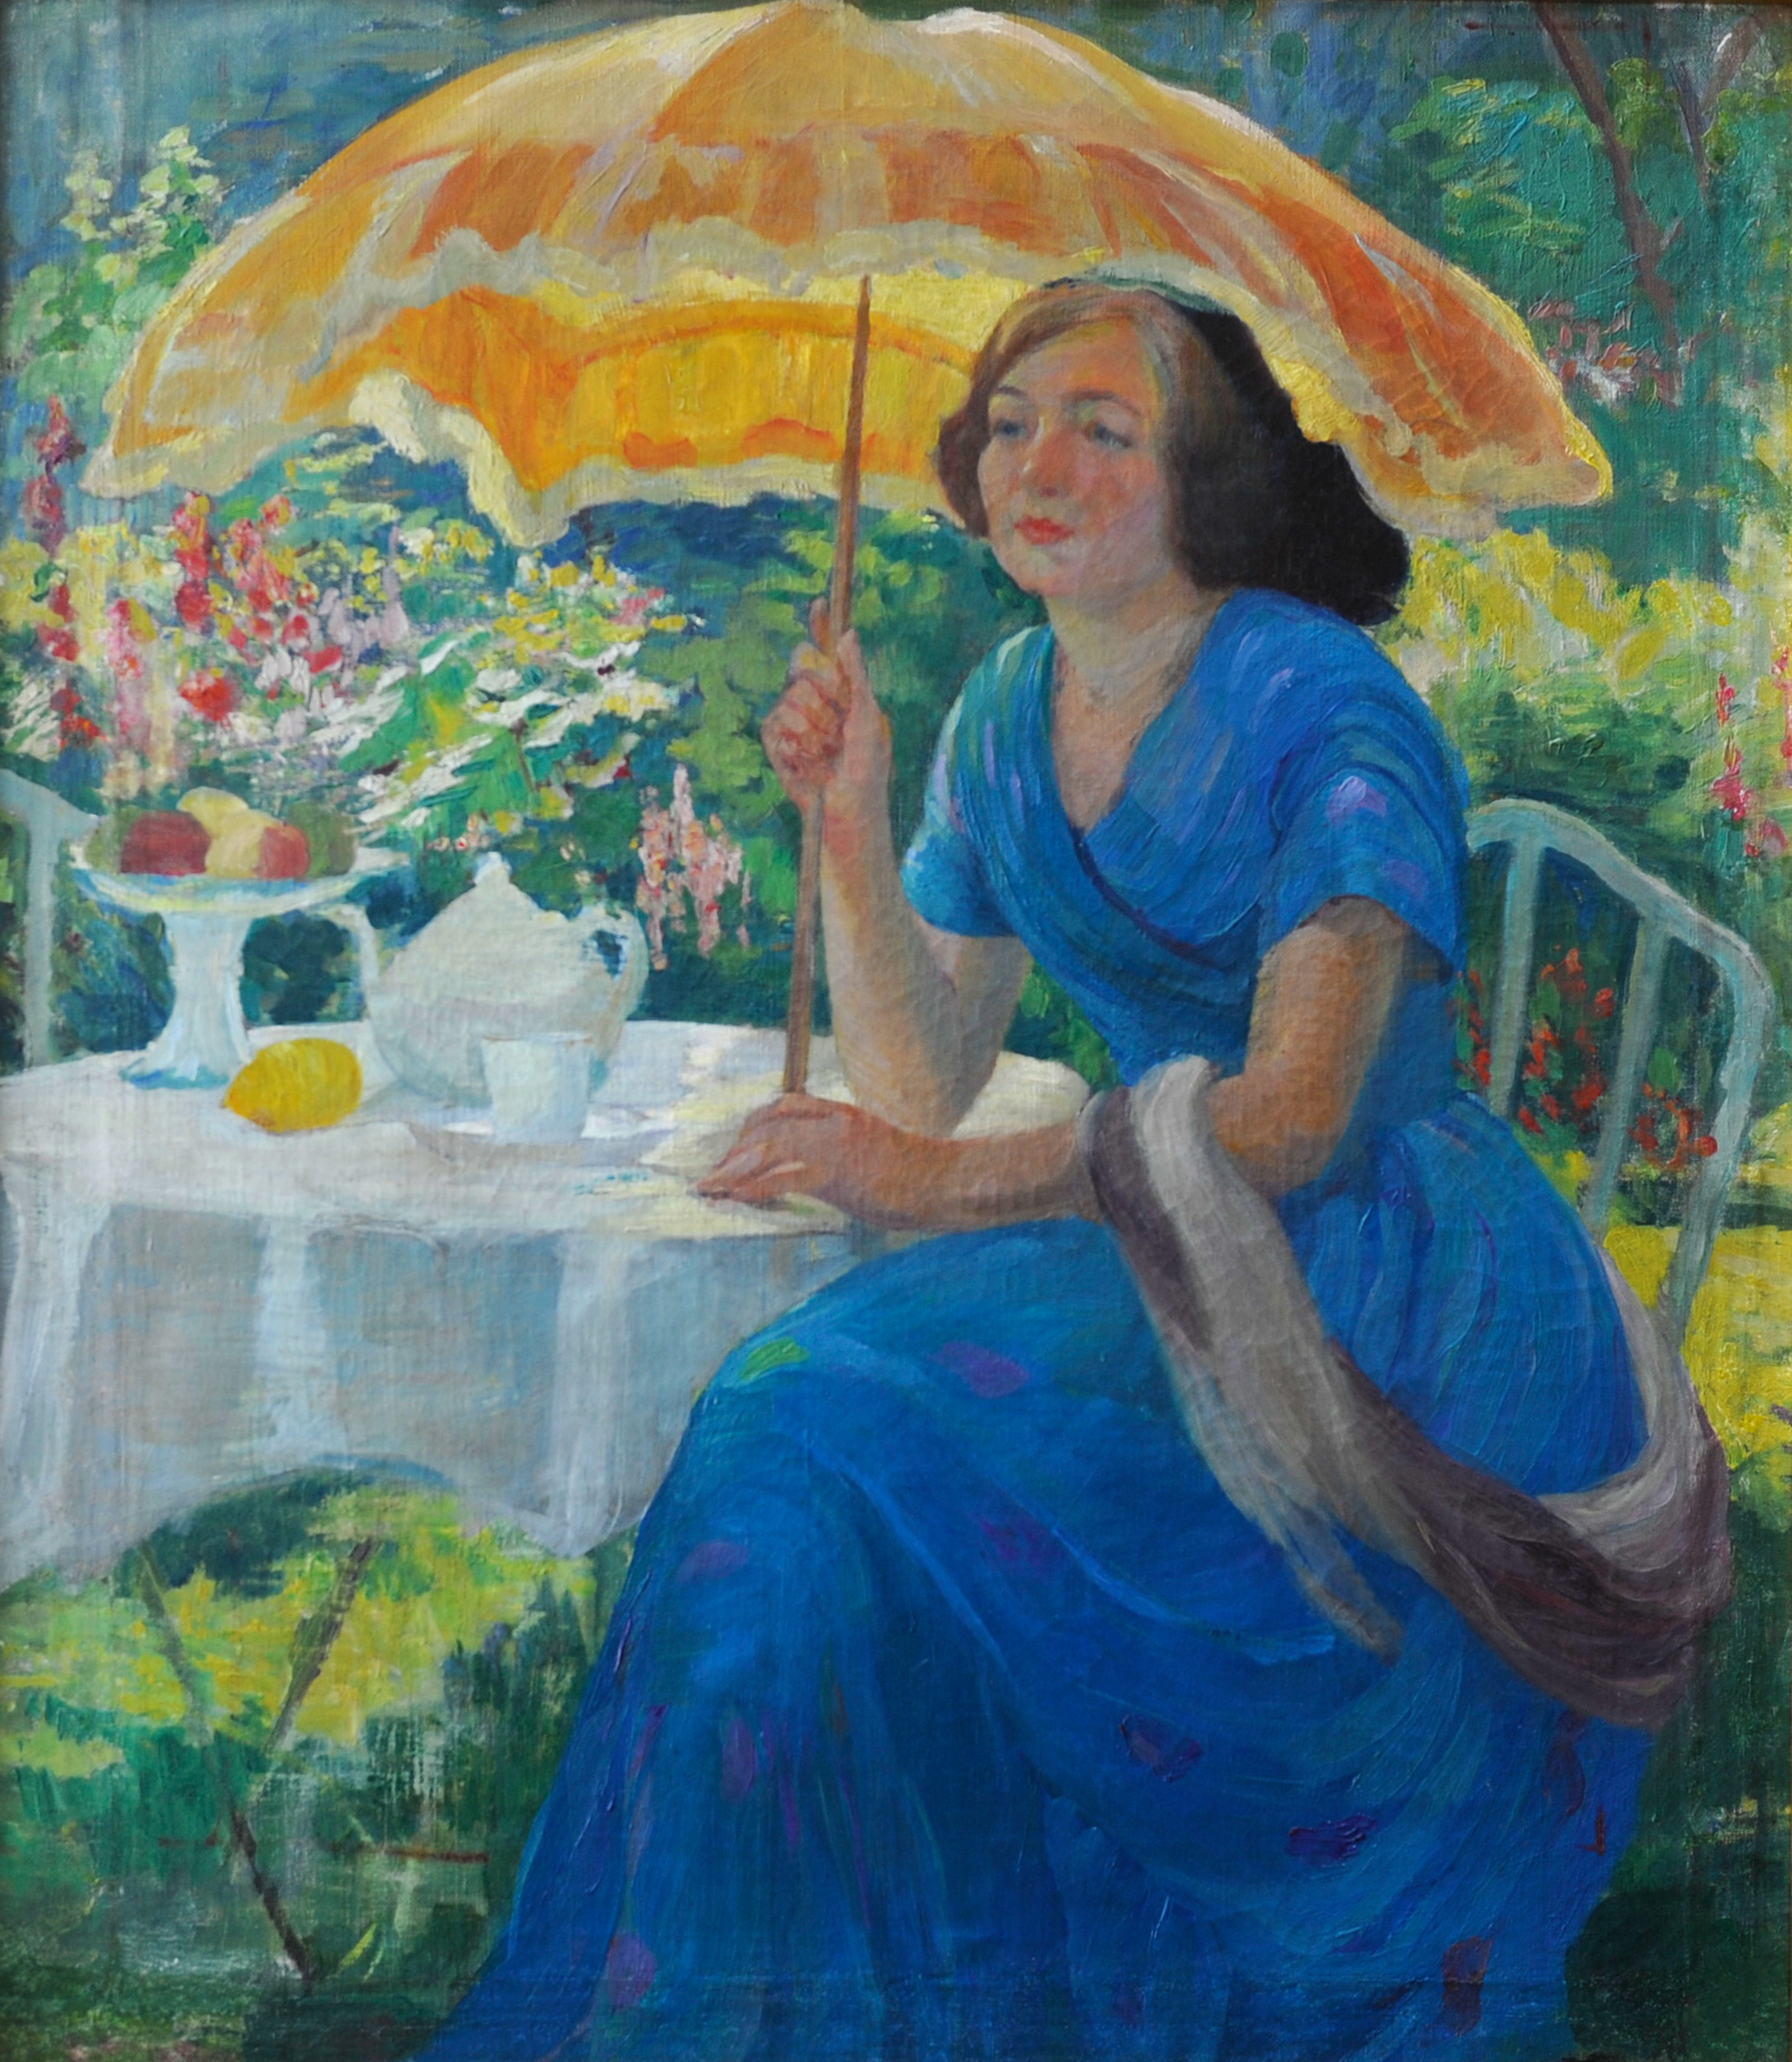 “Tea in a Garden” painting by Mary C. Wheeler (1846-1920), founder of the Wheeler School, is an oil painting of a woman in a blue dress, sitting at a small round table in a garden, holding a yellow parasol. 